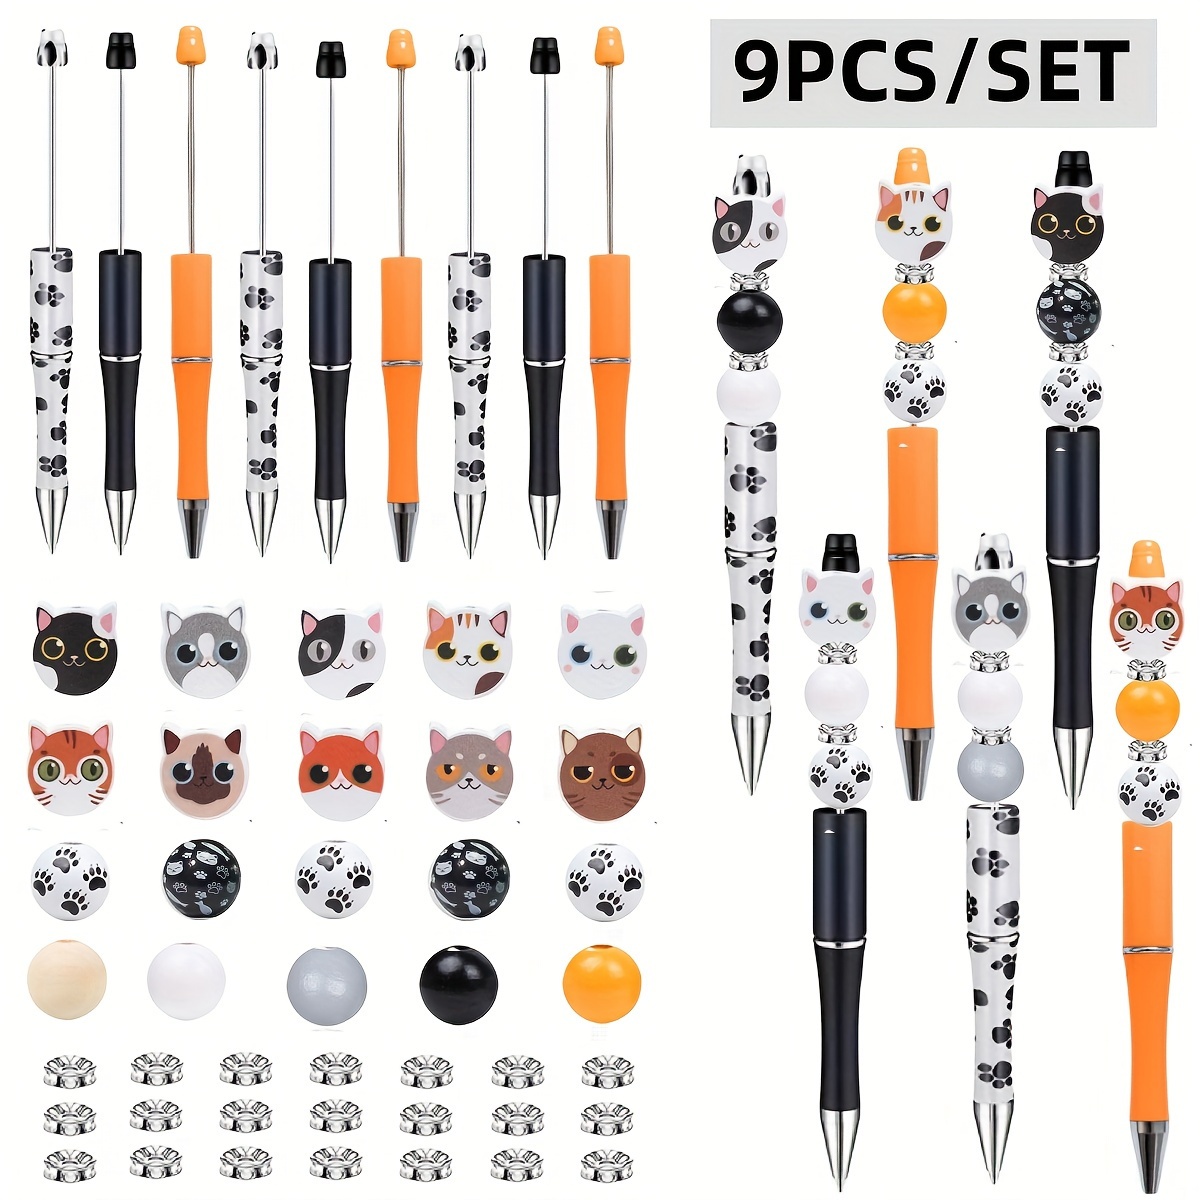 

9pcs Cute Cat Bead Diy Ballpoint Pens Set - Fine Point, Quick Drying Plastic Stick Pens For Smooth Writing, Twist Closure, Round Body Shape - Perfect For Office And Gifting (assorted Styles)